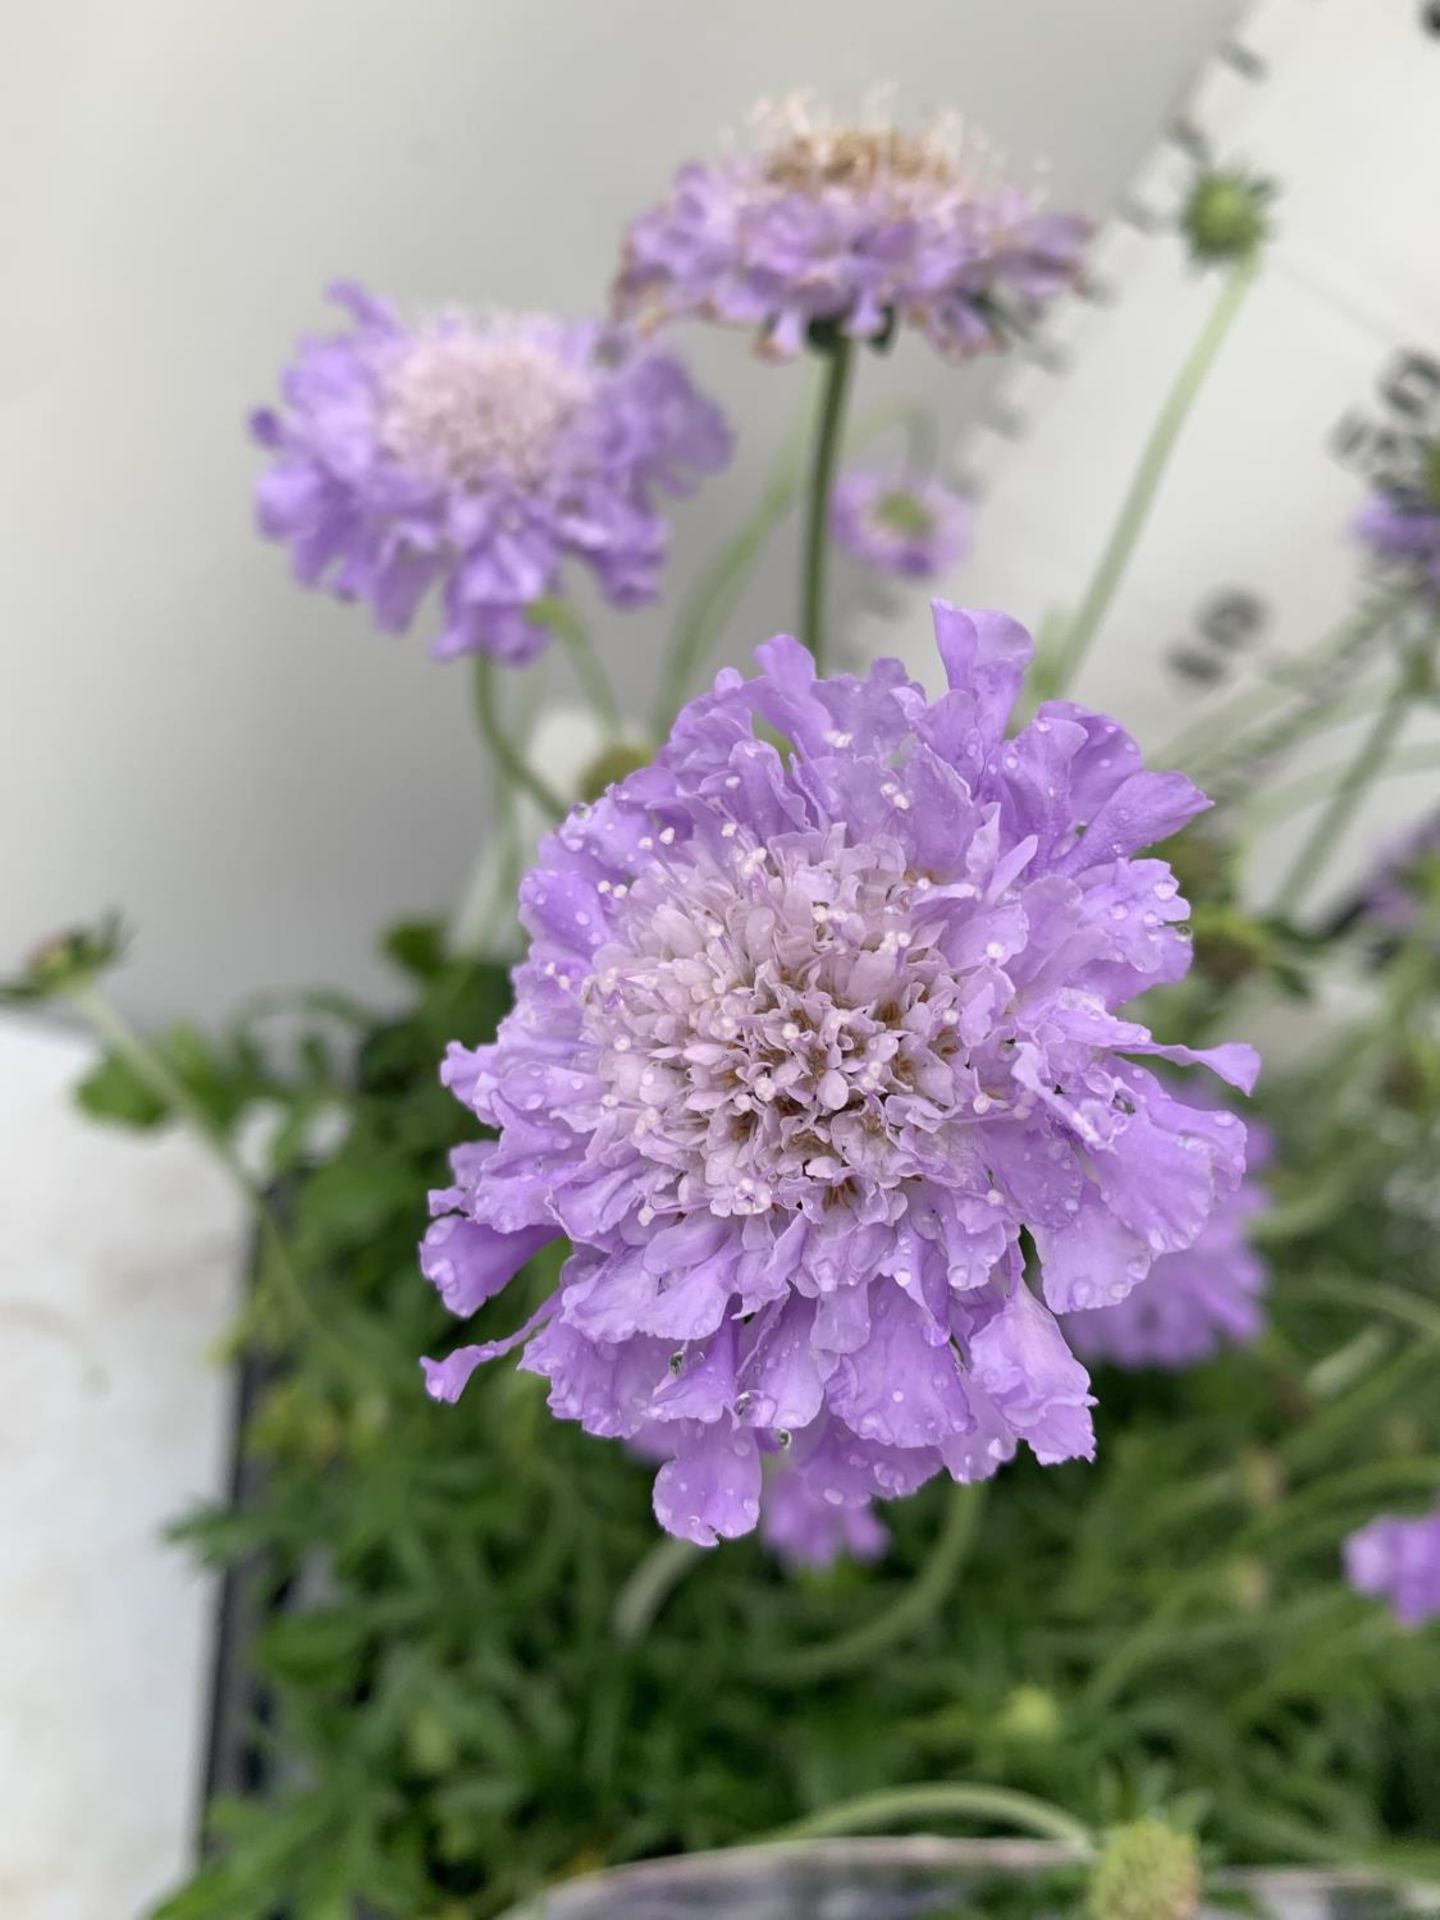 SIX SCABIOSA BUTTERFLY BLUE IN 2 LTR POTS 50-60CM TALL TO BE SOLD FOR THE SIX PLUS VAT - Image 2 of 5